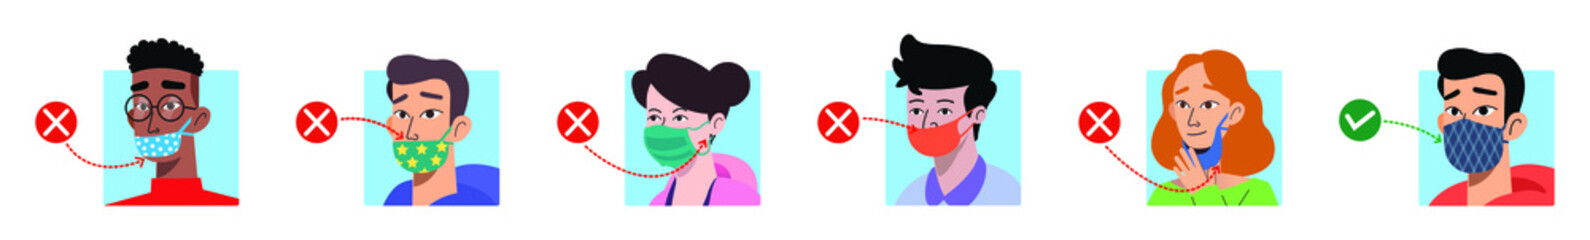 Avoid mistakes while wearing mask.
How to wear face masks correctly